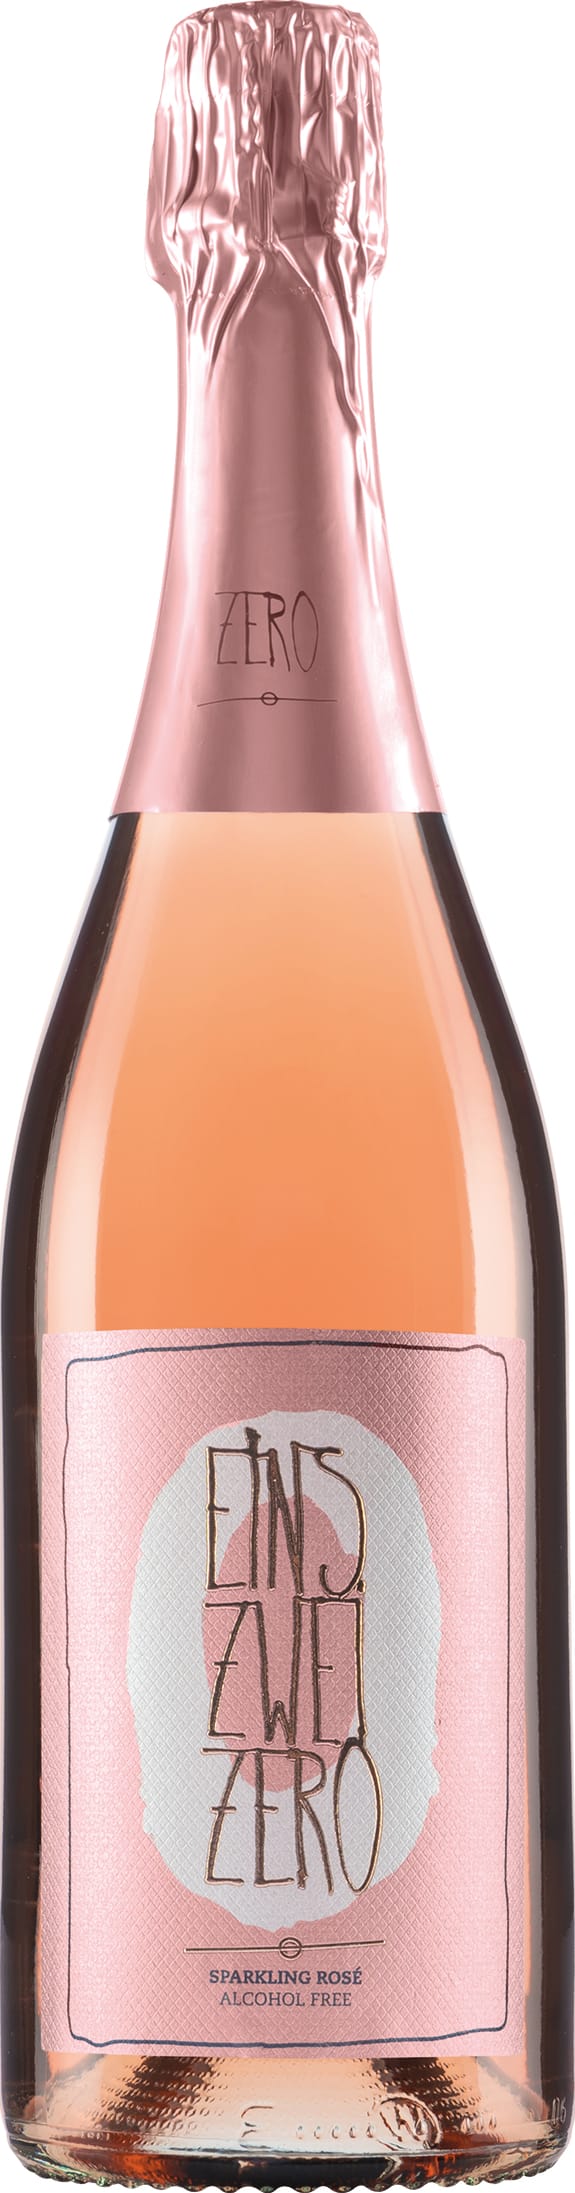 JJ Leitz Eins Zwei Zero Sparkling Rose (Alcohol Free) 75cl NV - Buy JJ Leitz Wines from GREAT WINES DIRECT wine shop